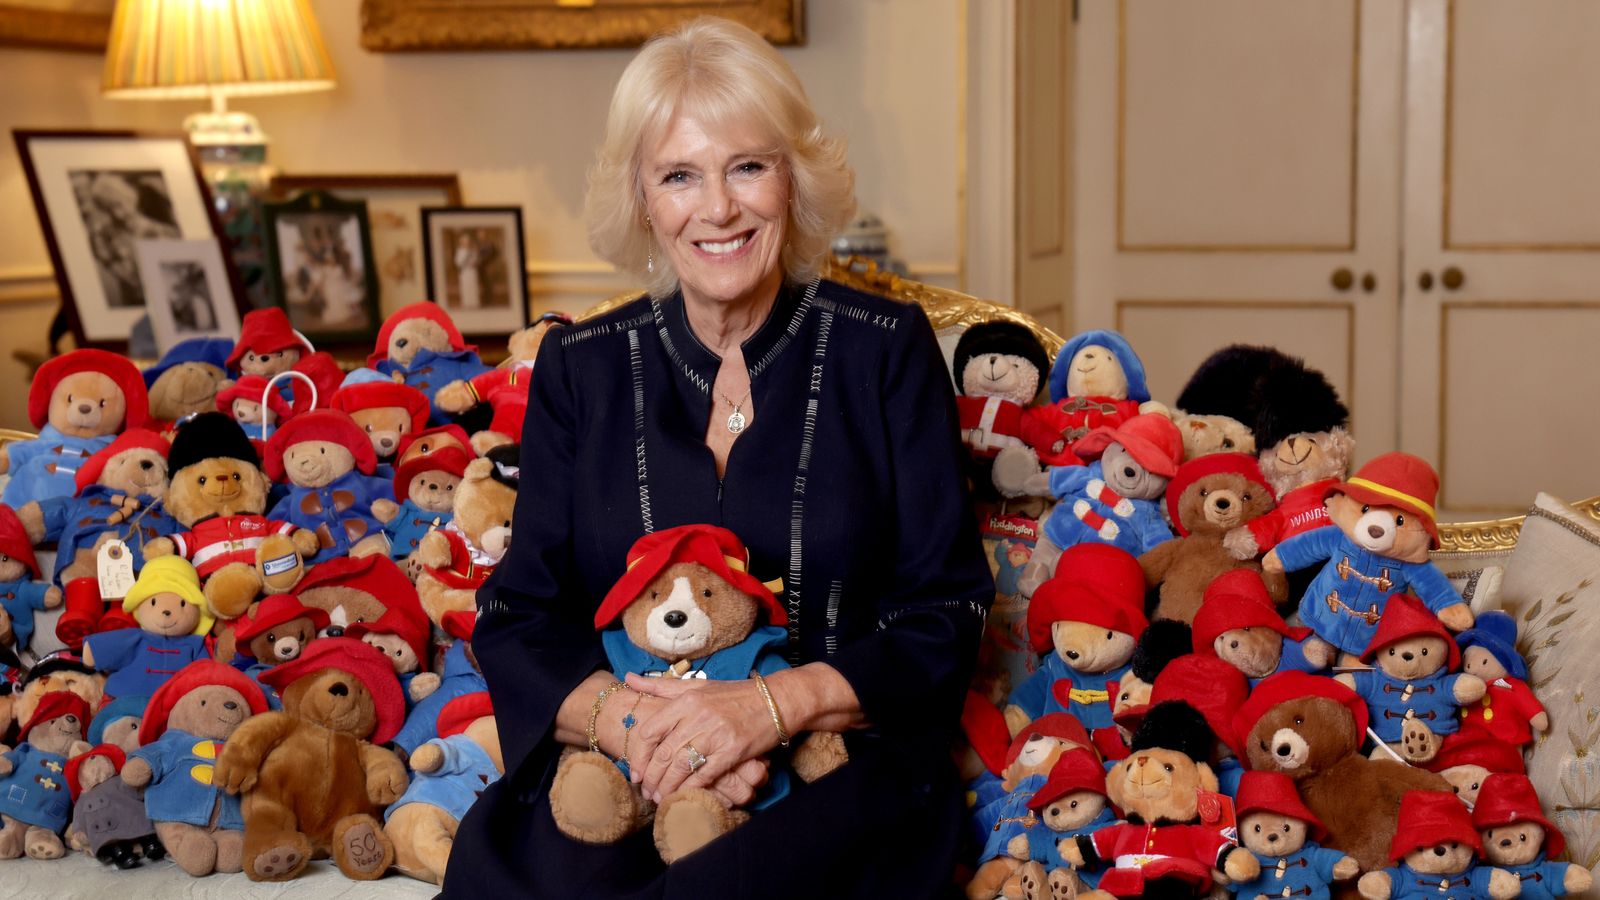 Camilla pictured surrounded by Paddington Bears as tributes to Queen donated to Barnado's